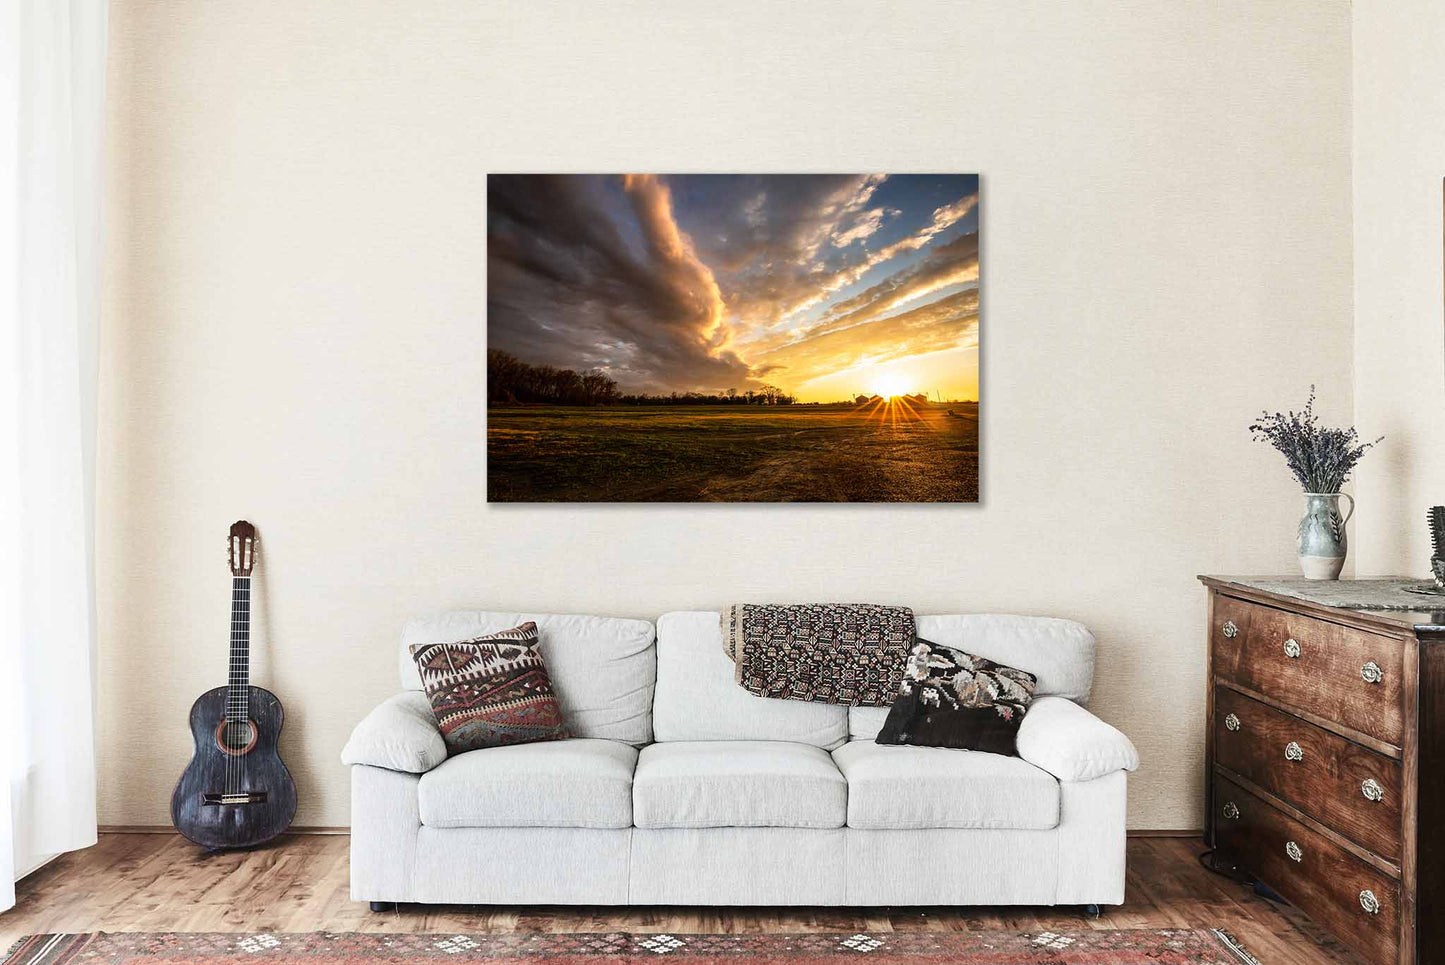 Southeast Canvas Wall Art (Ready to Hang) Gallery Wrap of Warm Sunset Over Farm in Mississippi Delta in Mississippi Country Photography Southern Decor